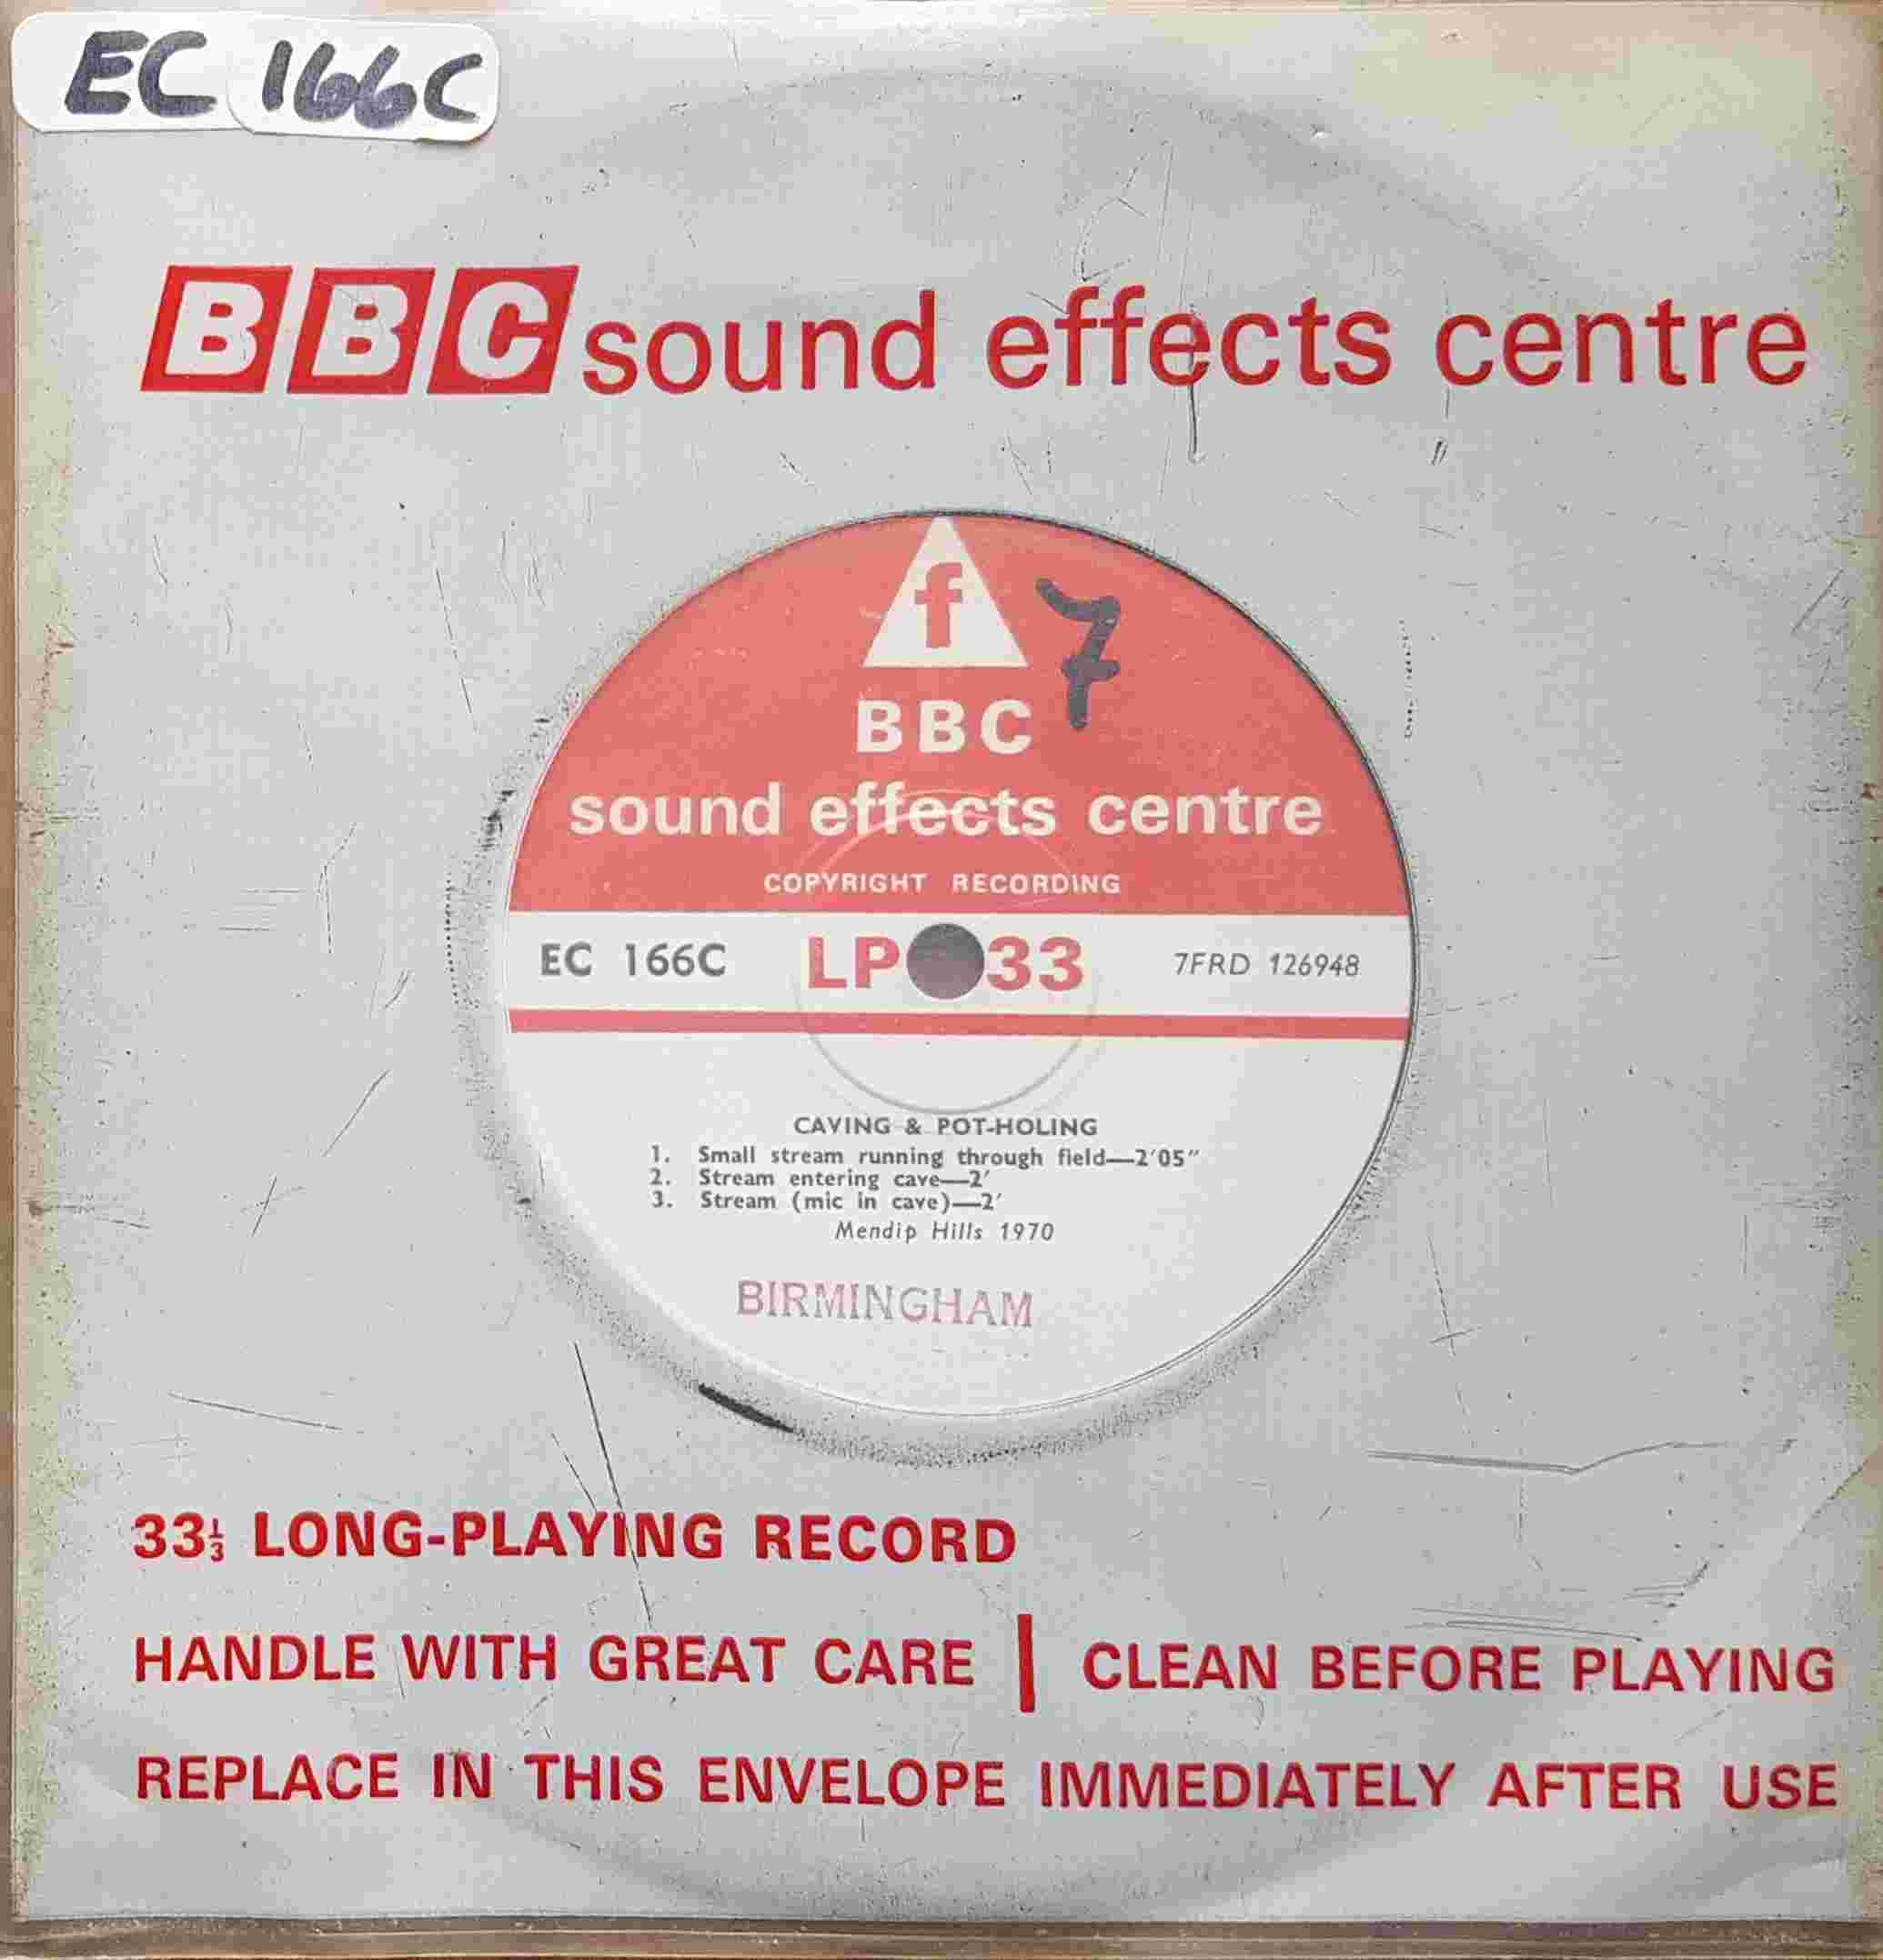 Picture of EC 166C Caving & pot-holing by artist Not registered from the BBC singles - Records and Tapes library